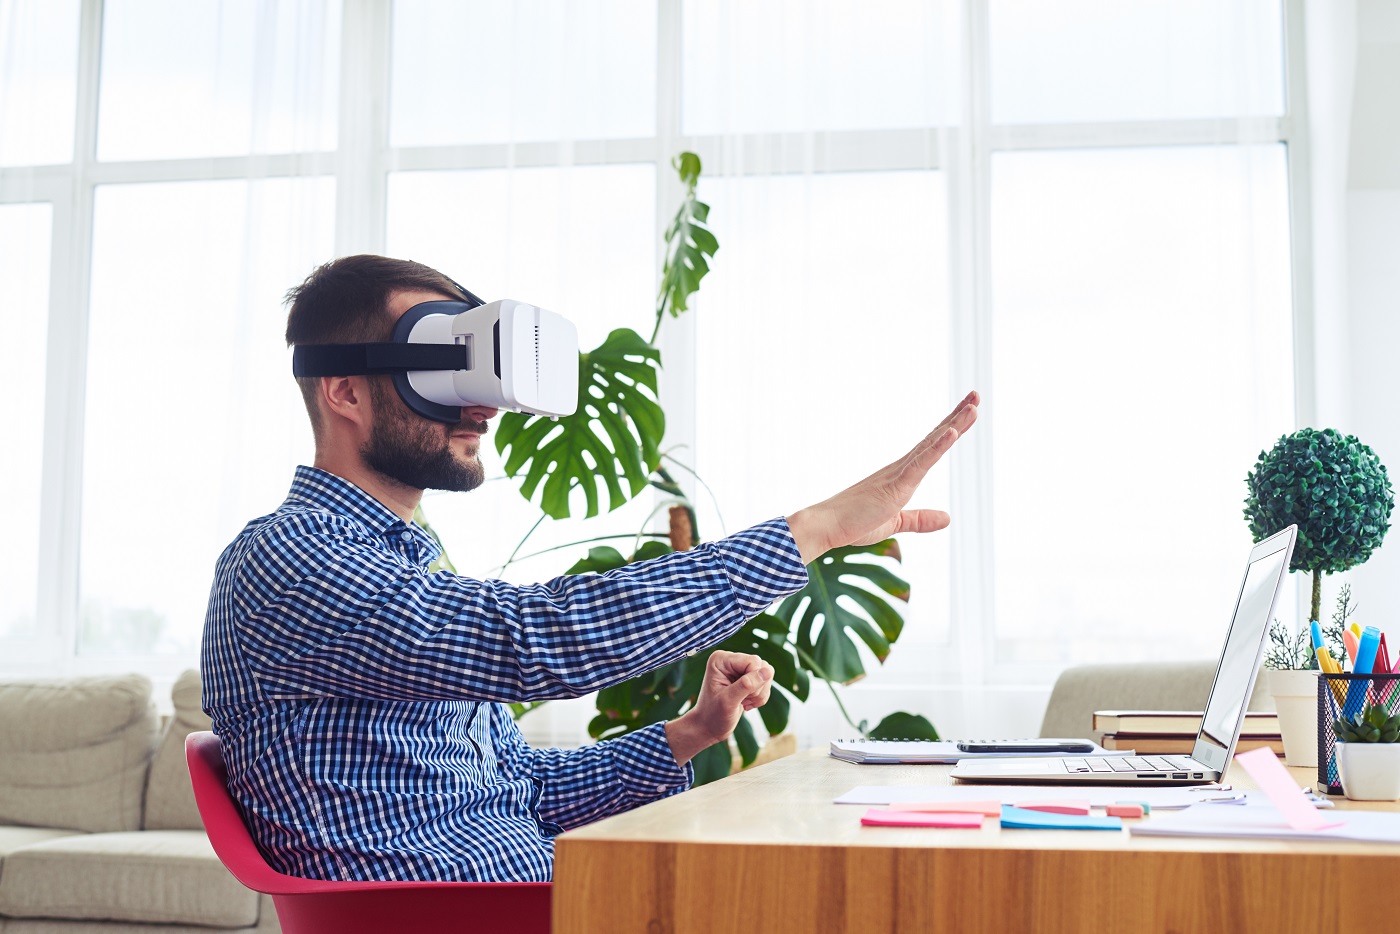 Man with VR headset sitting at a desk